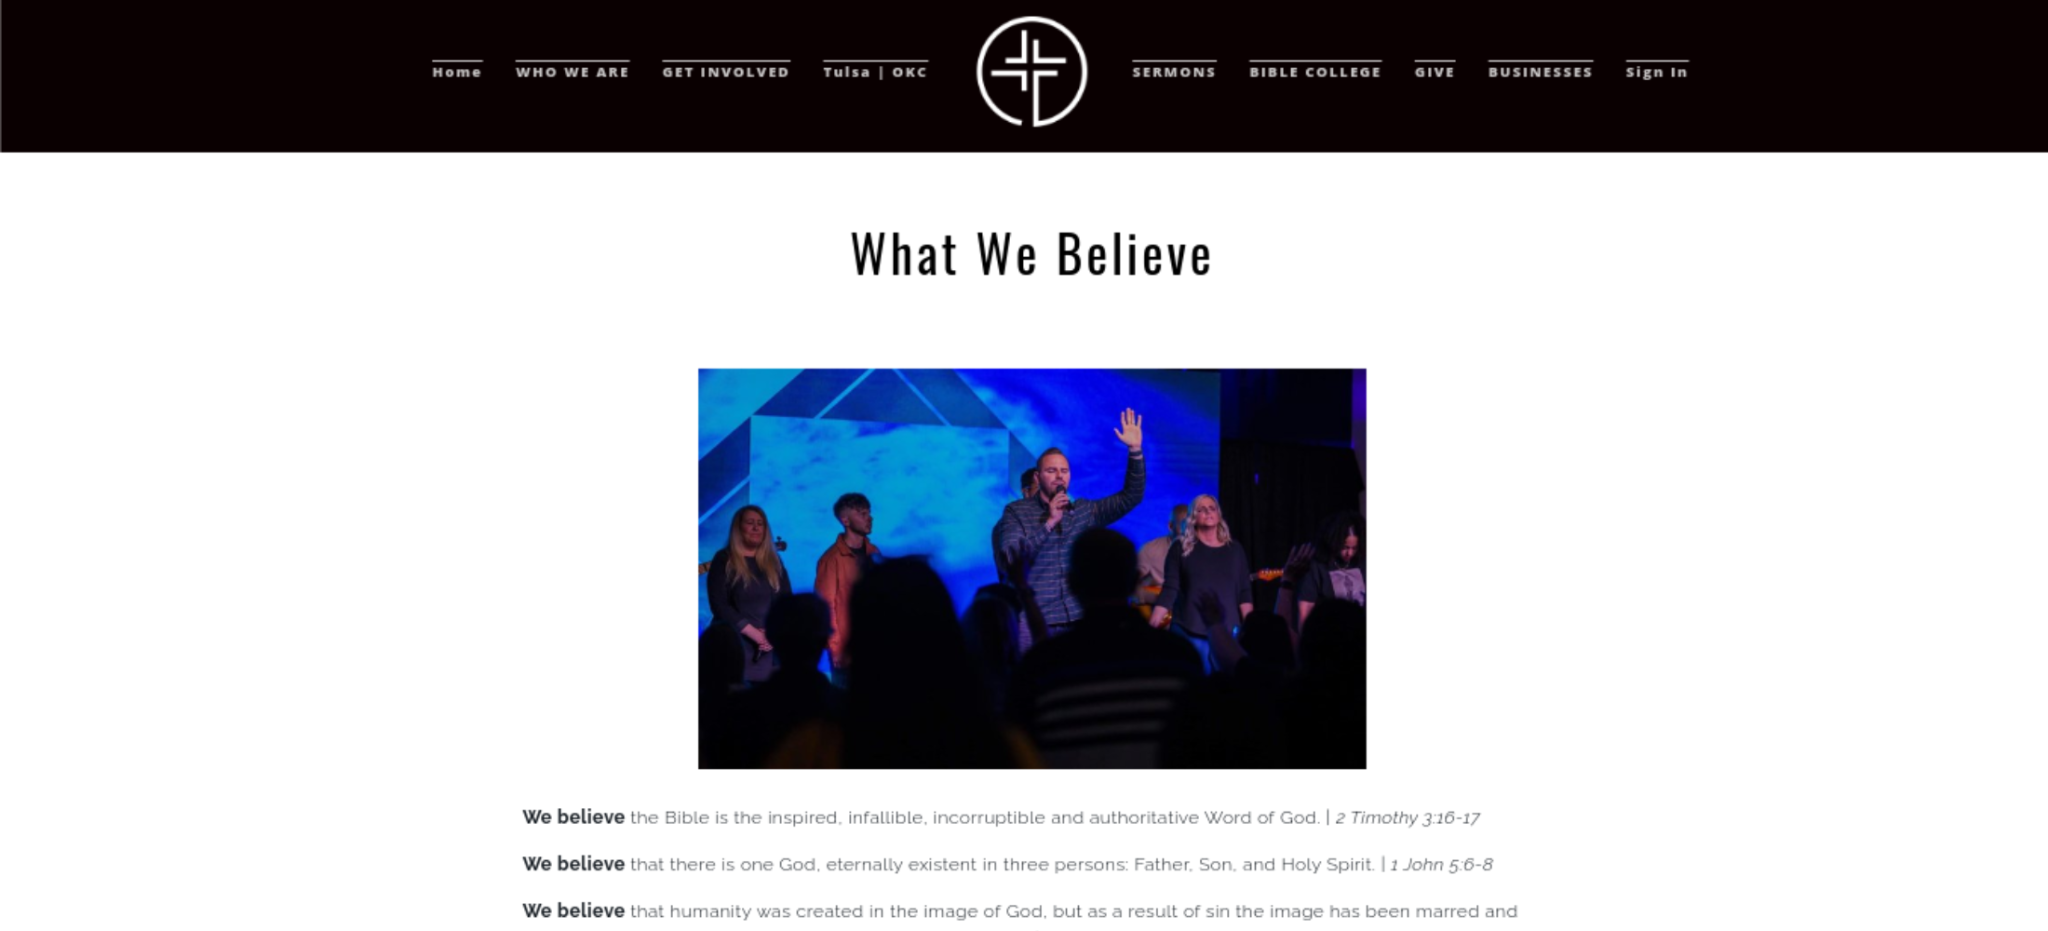 Screenshot from this church's website that shows their statement of faith. 